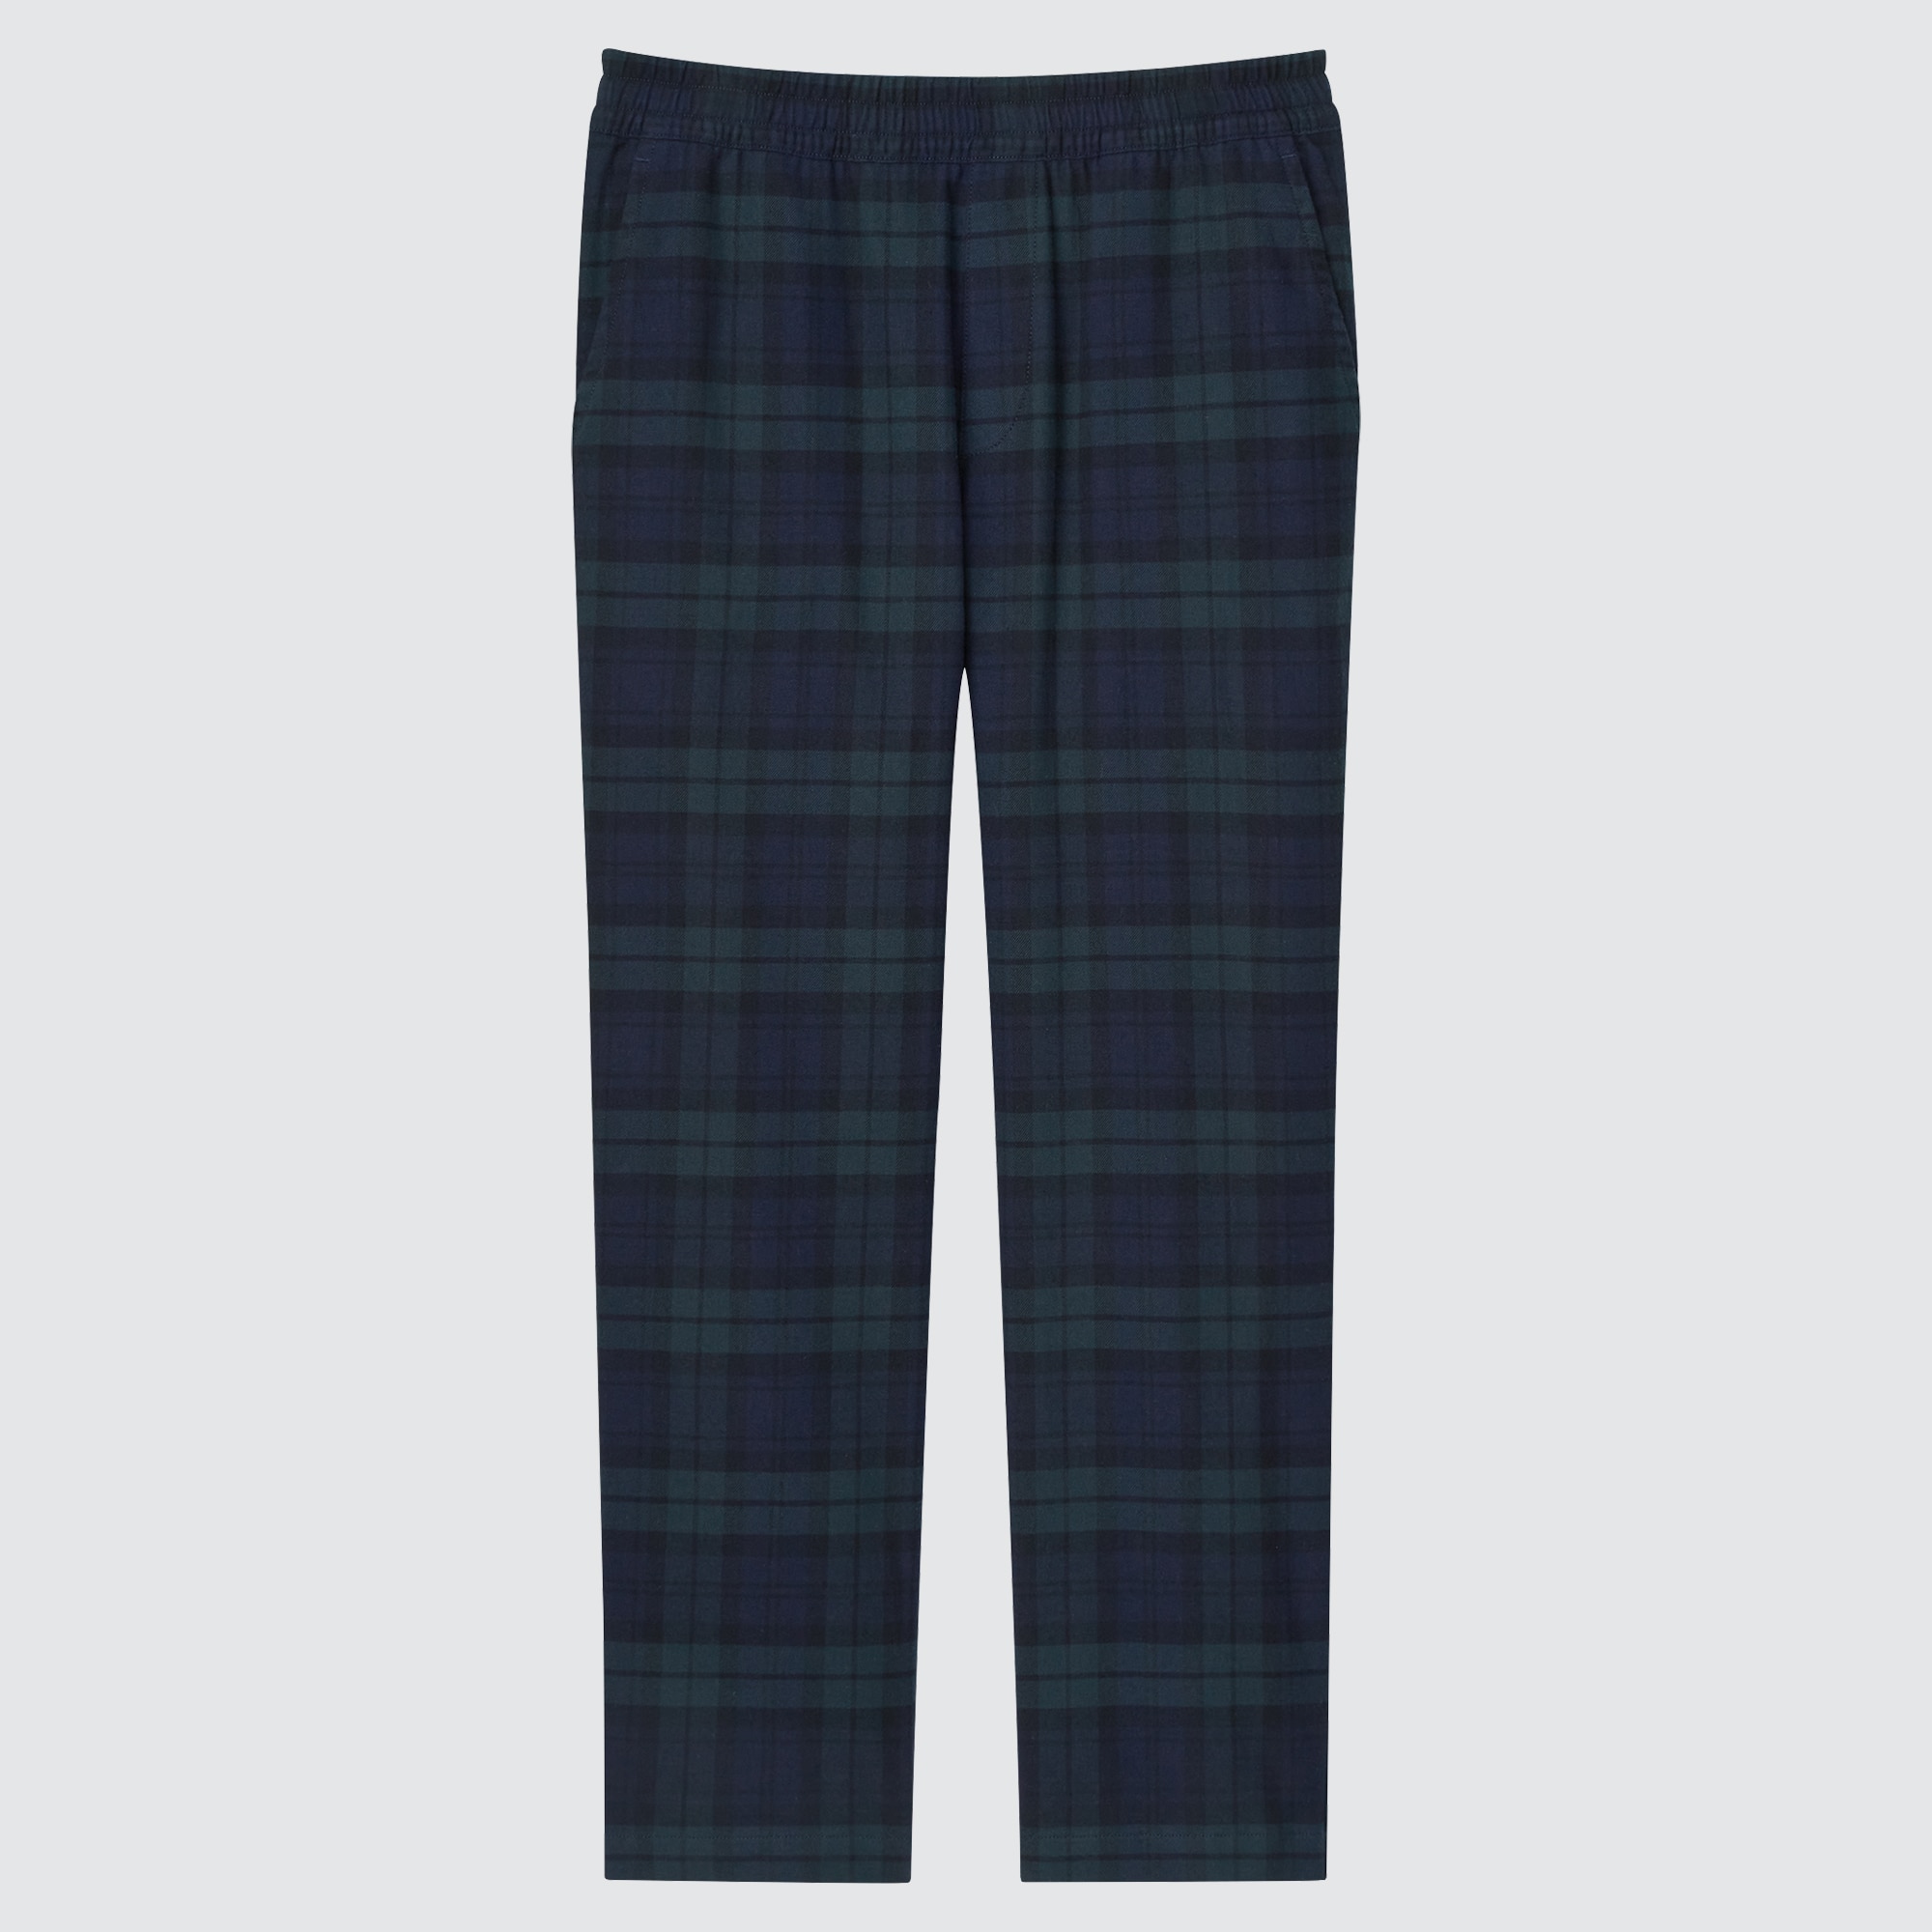 UNIQLO WOMEN SMART CHECKERED PANTS Womens Fashion Bottoms Other Bottoms  on Carousell